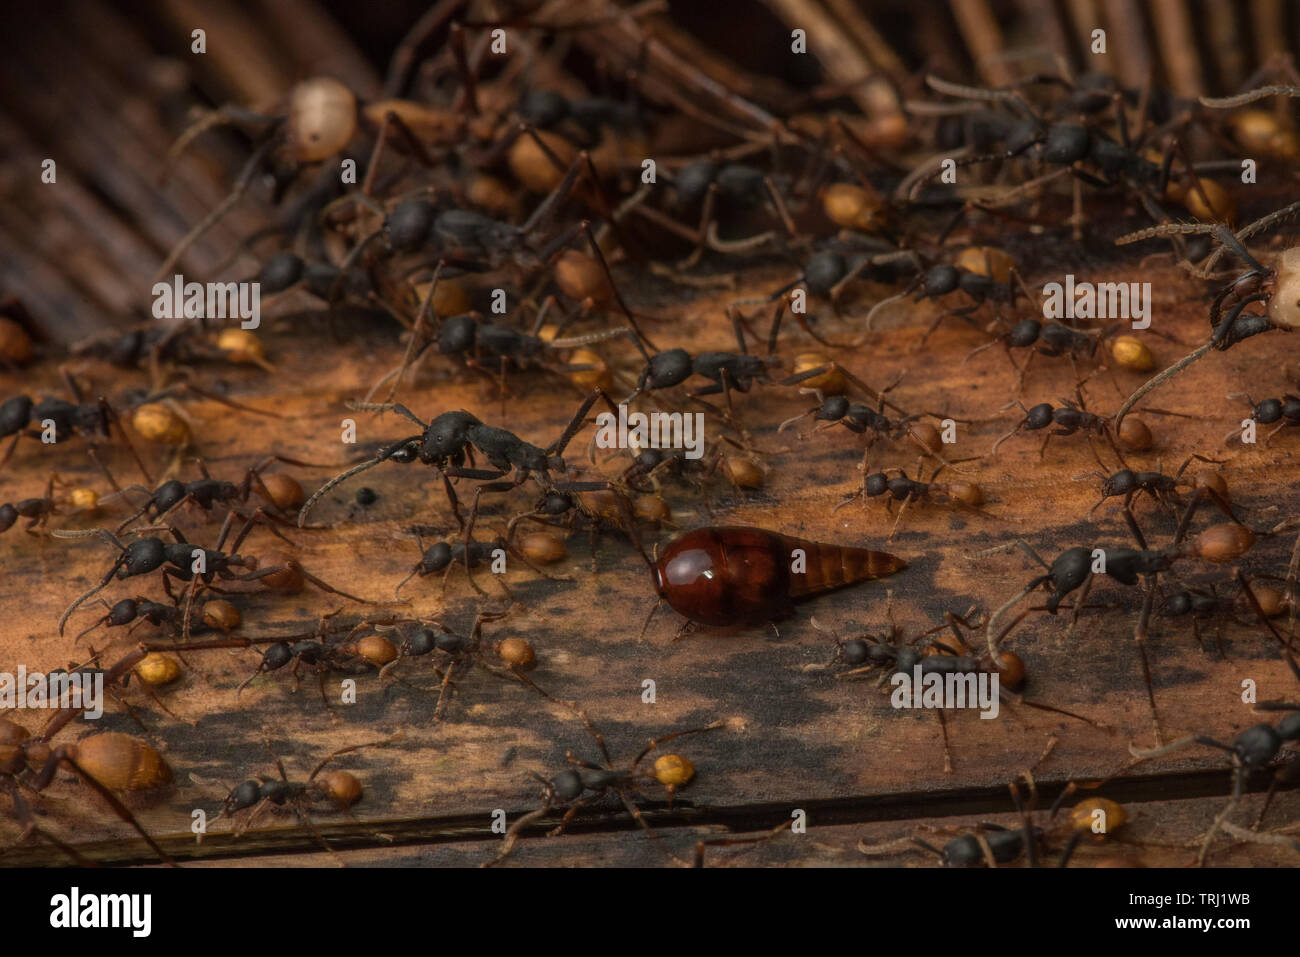 A vatesus species rove beetle marches alongside with the army ants, these beetles are always found in close association with the army ants. Stock Photo